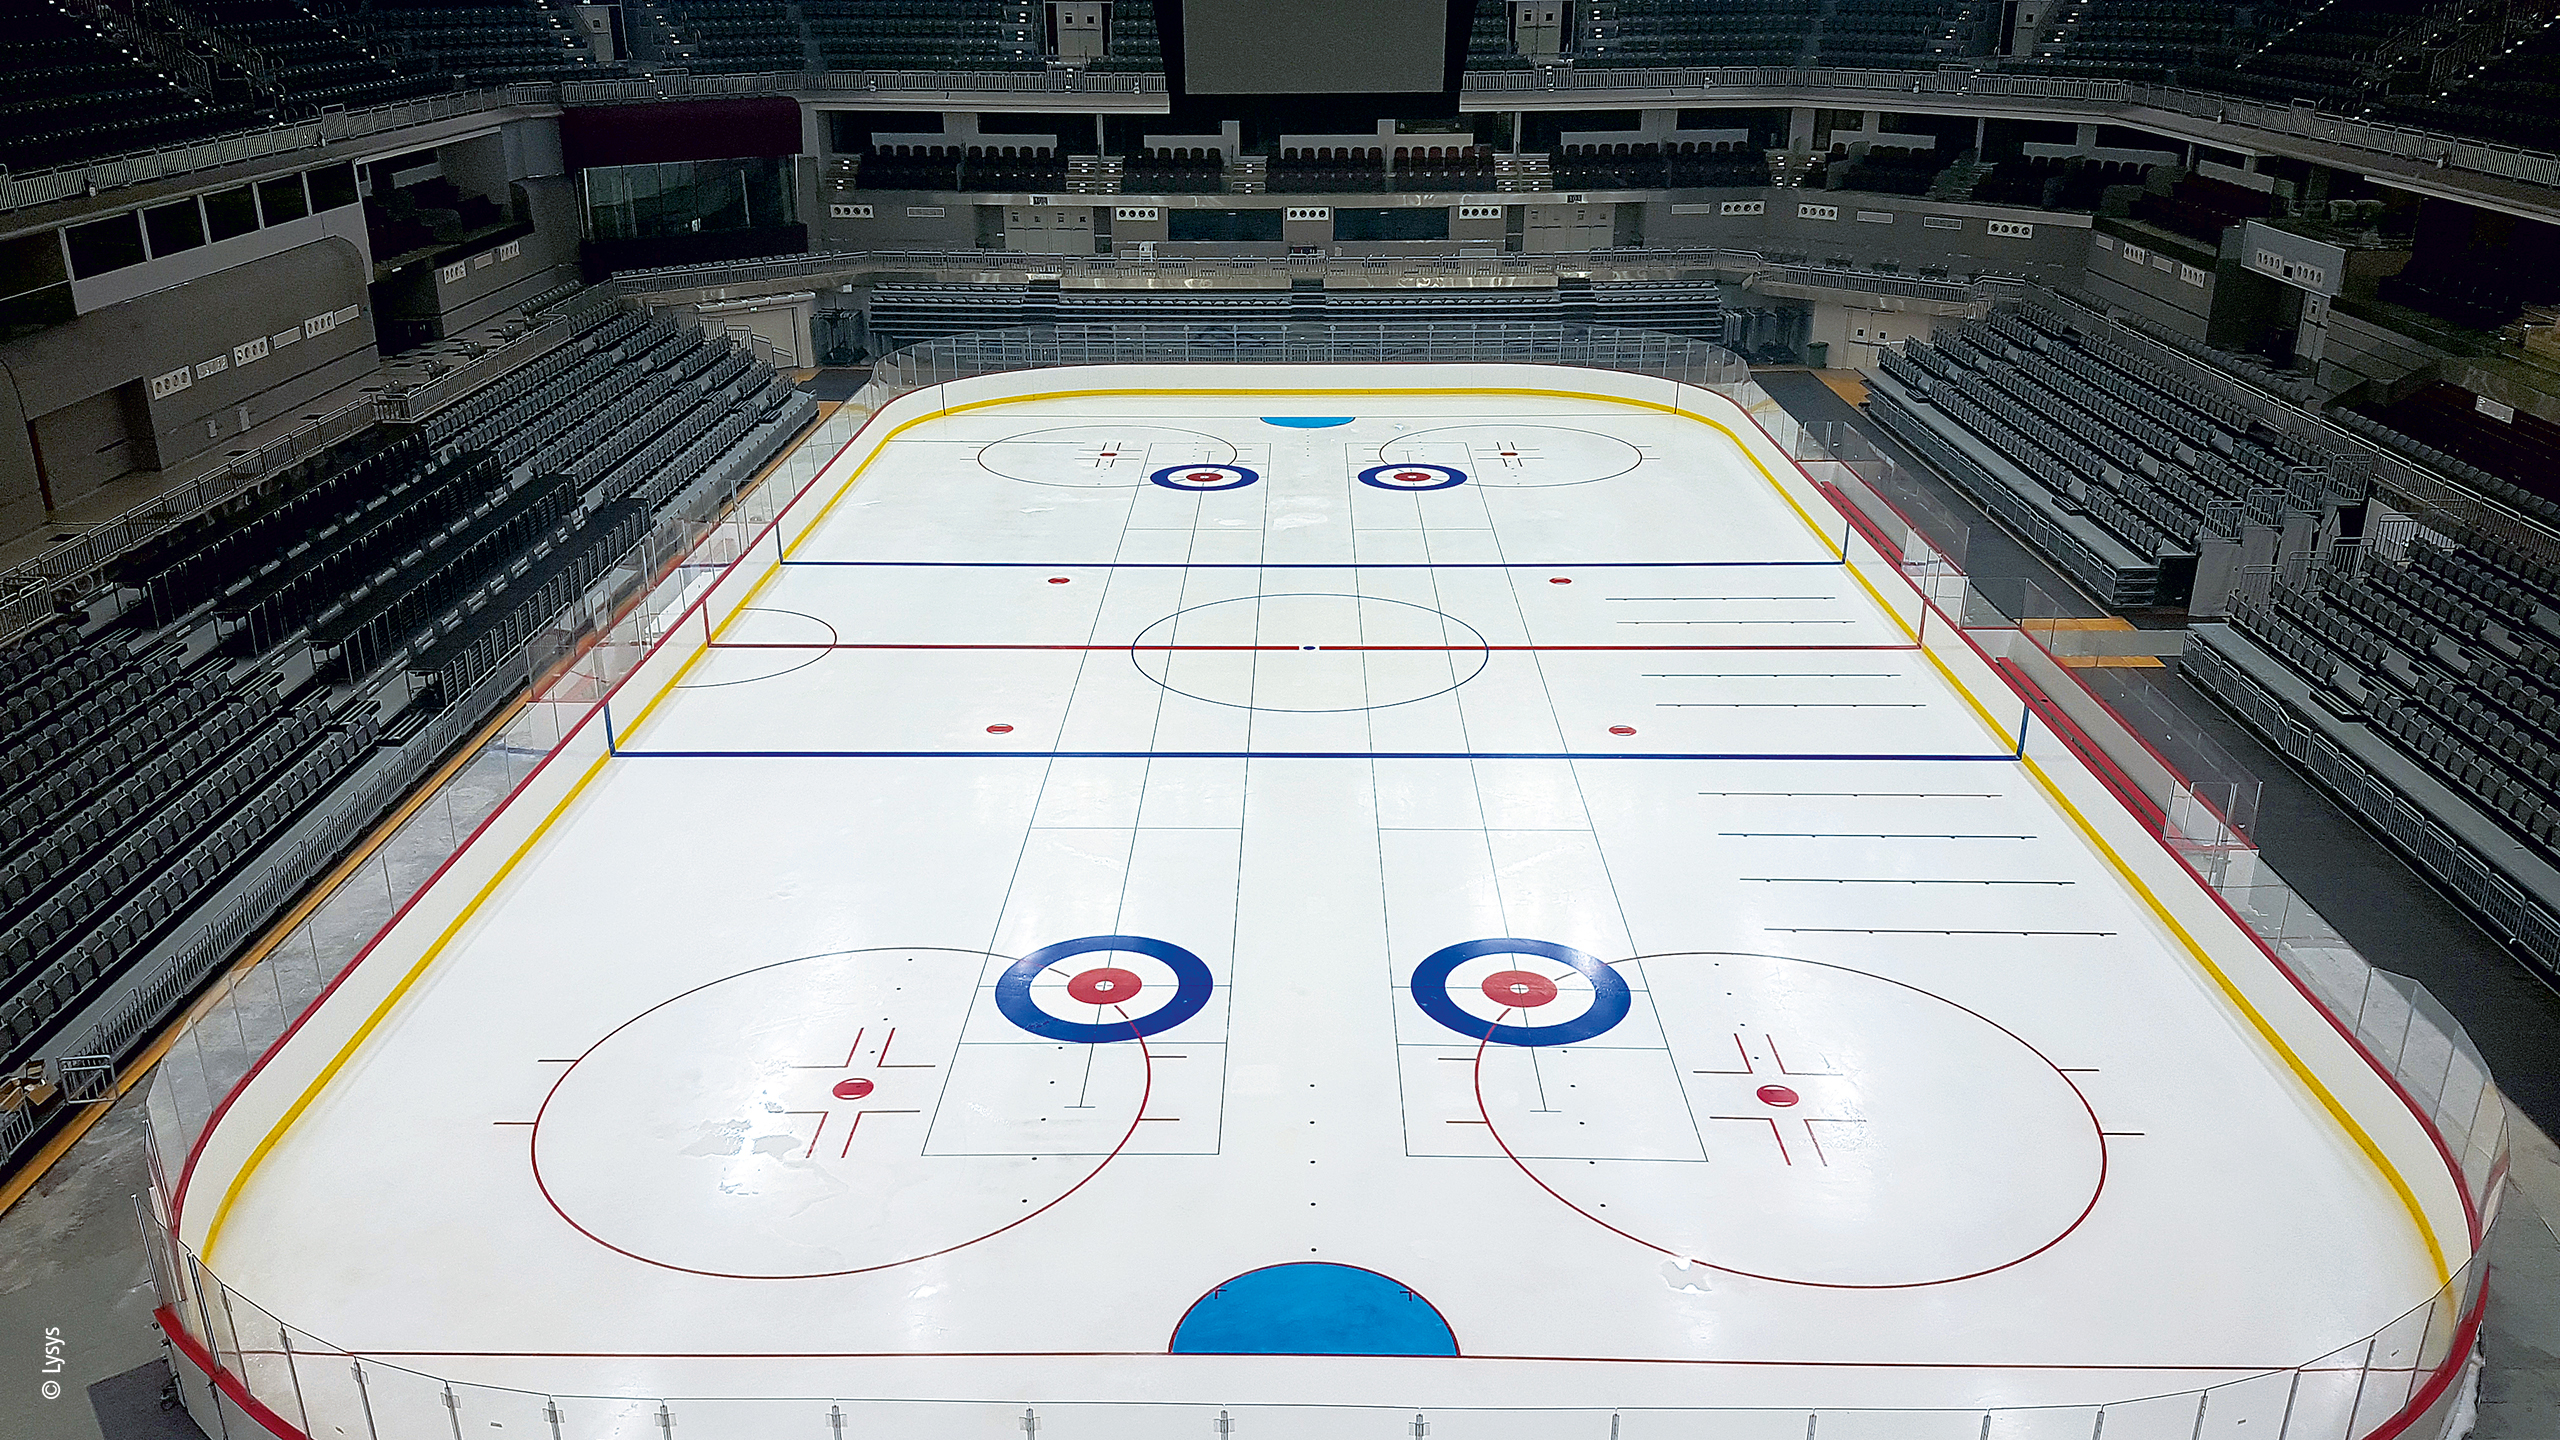 Simply by switching operating modes, the arena can transform into an ice rink. 